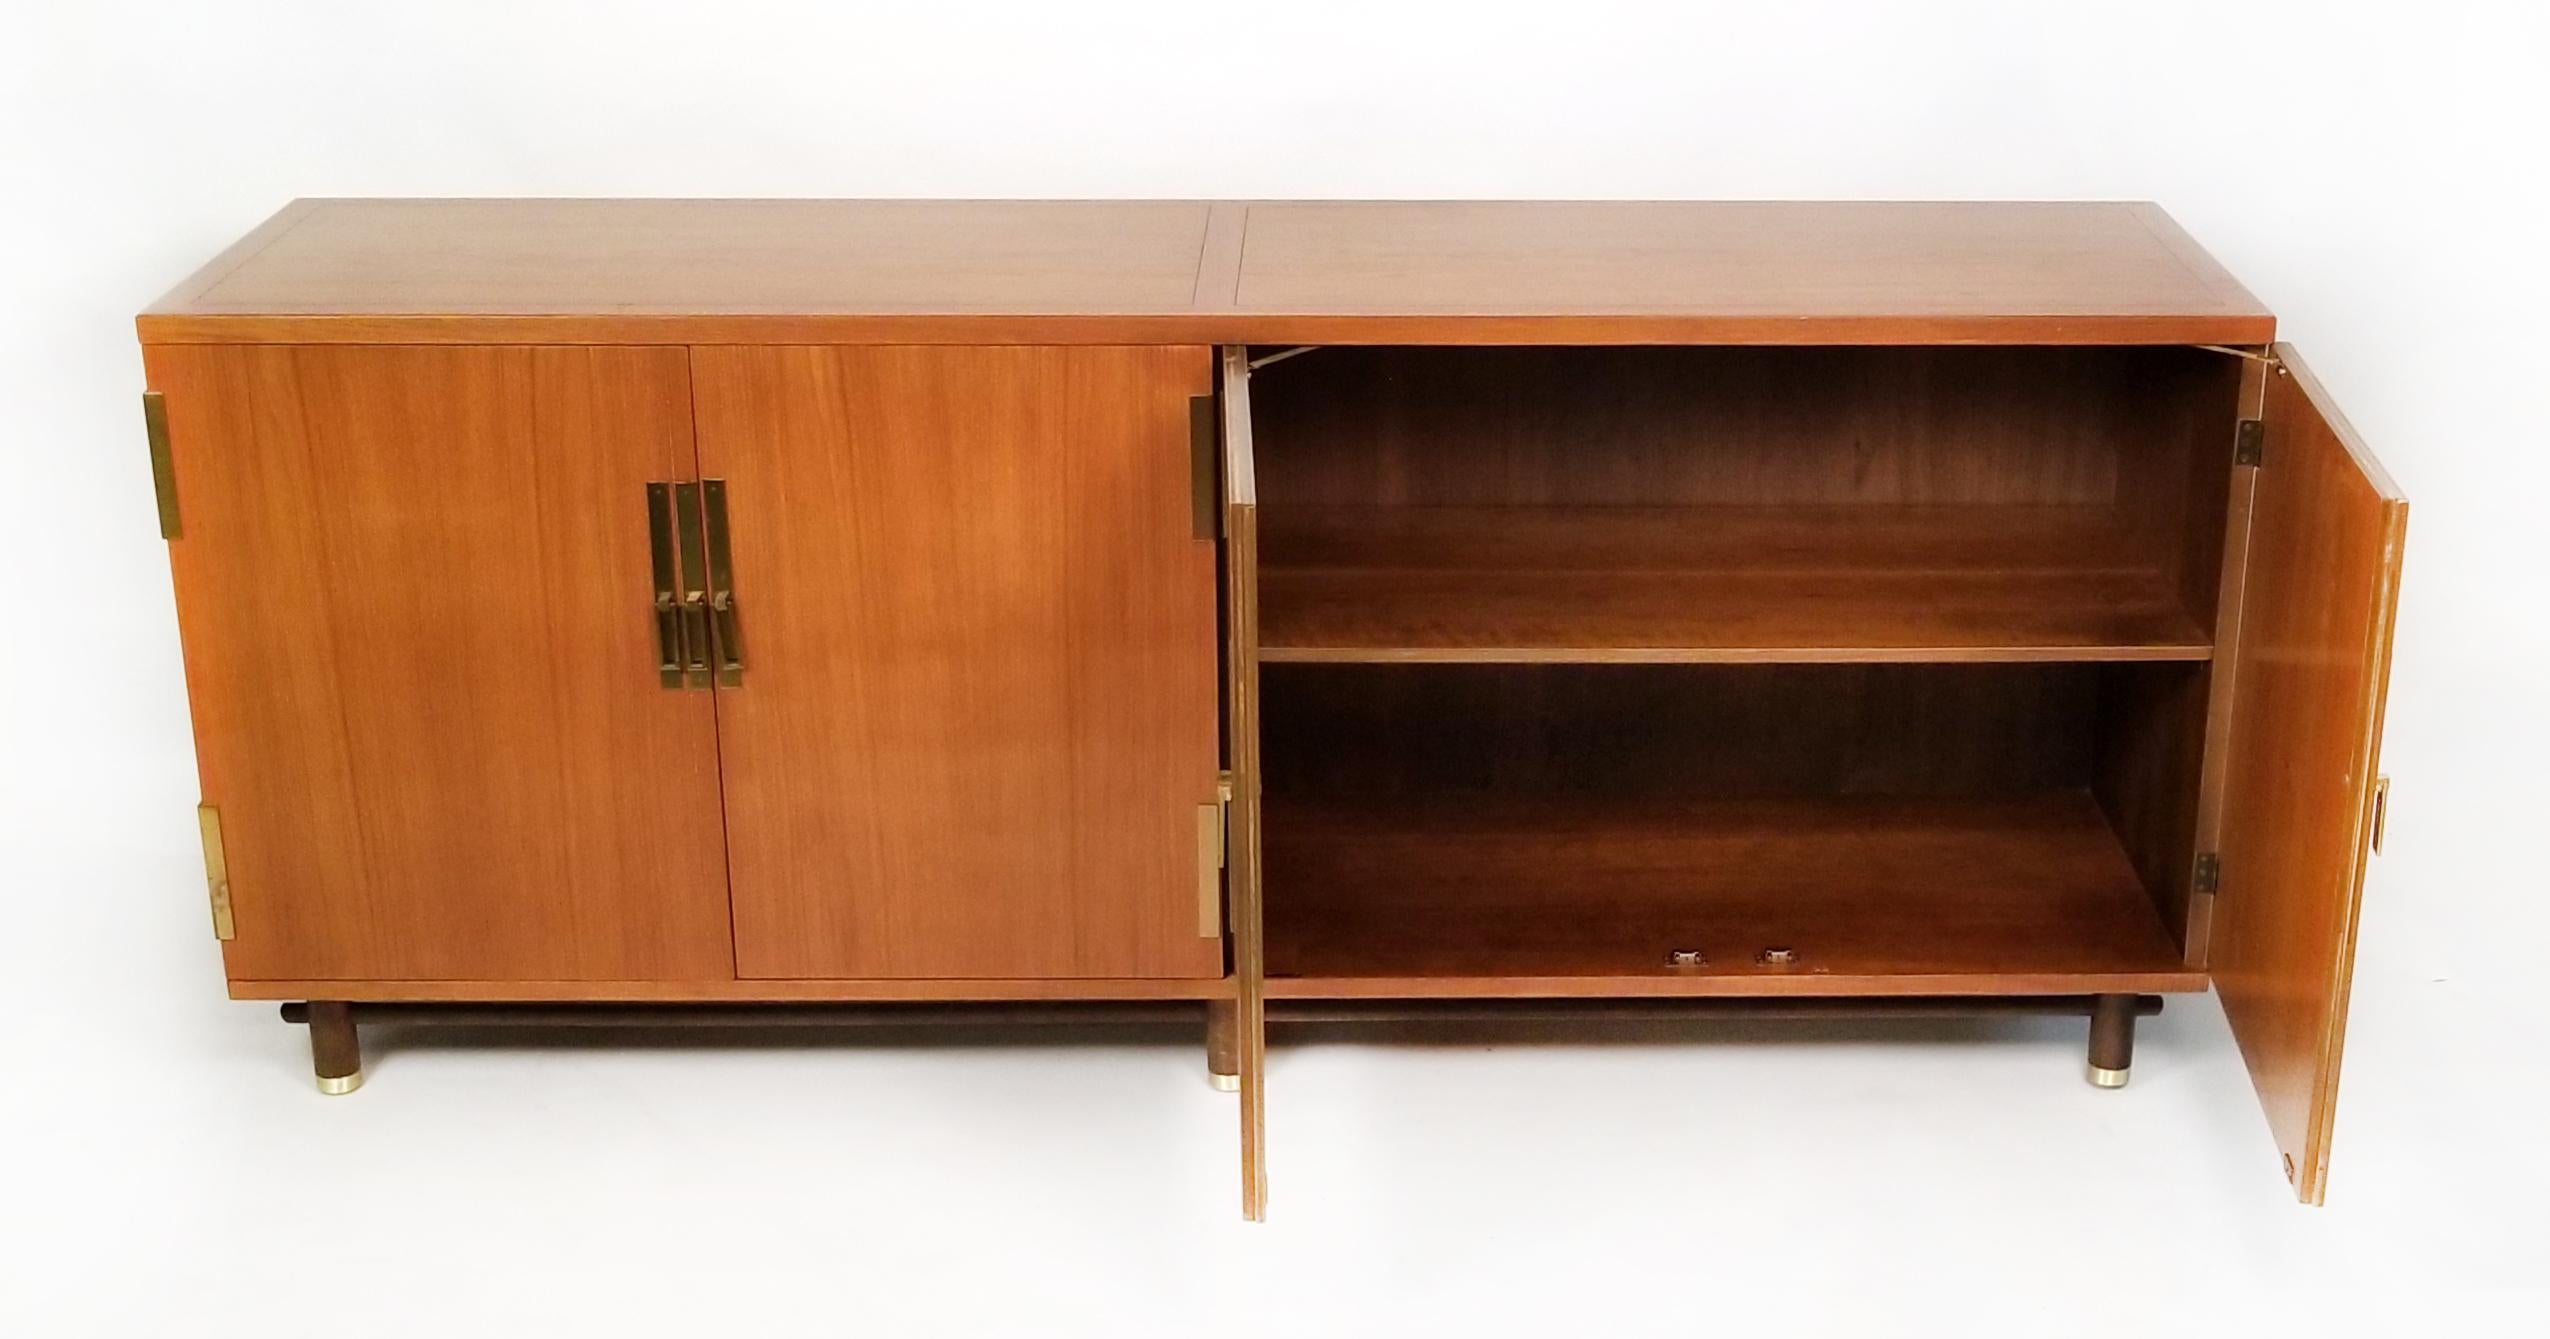 Mid-20th Century Credenza designed by Michael Taylor for Baker